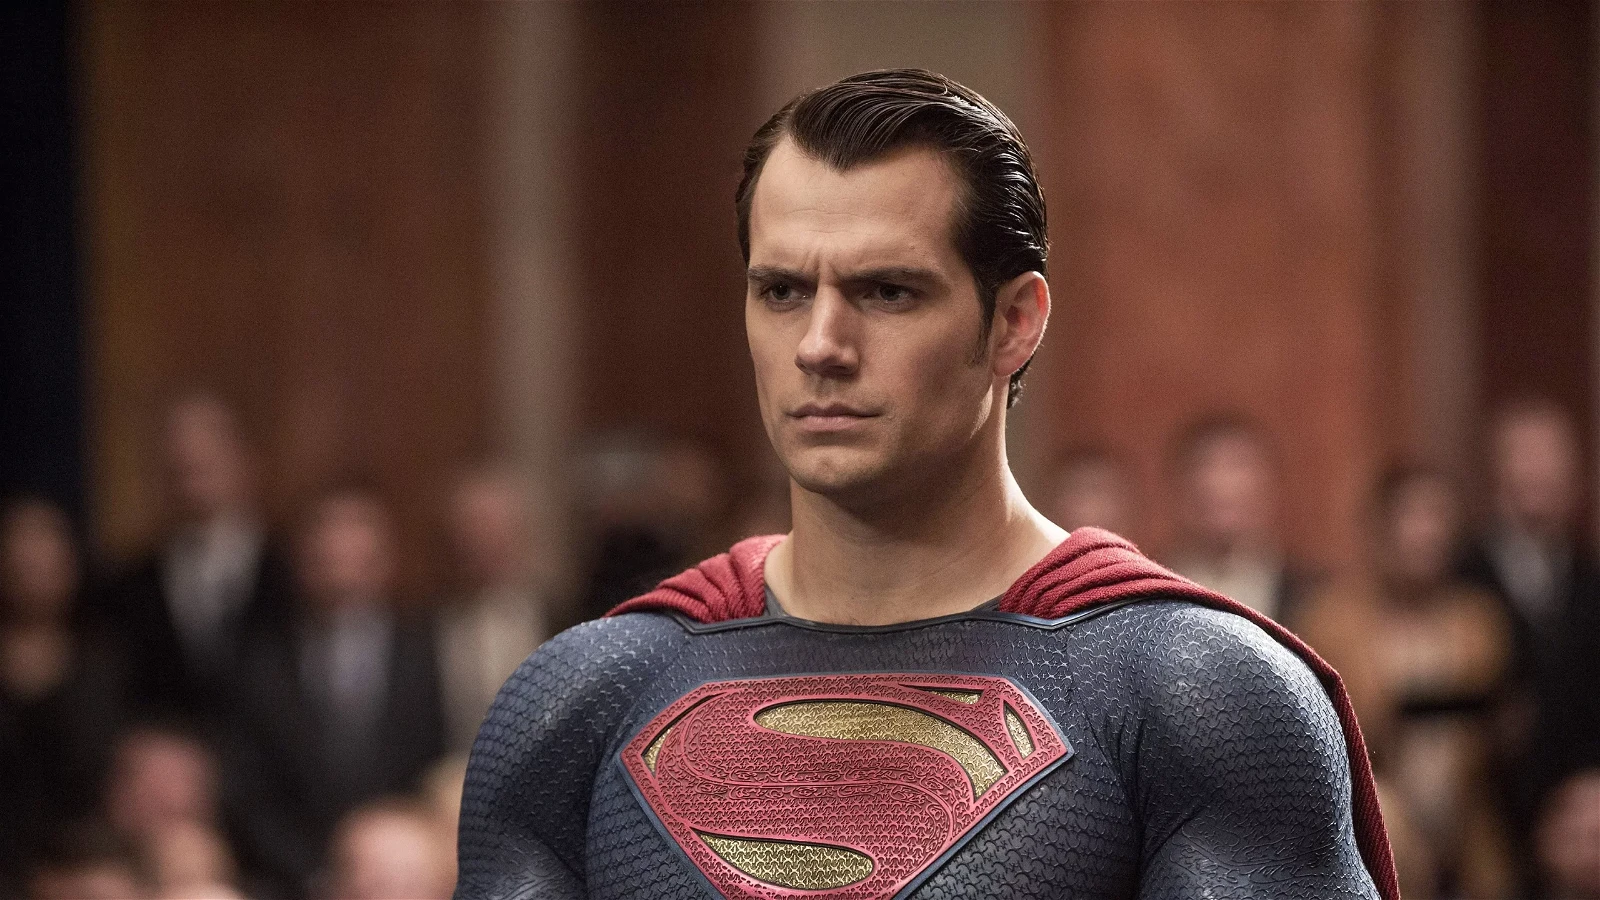 Henry Cavill as Superman in the DC Universe.